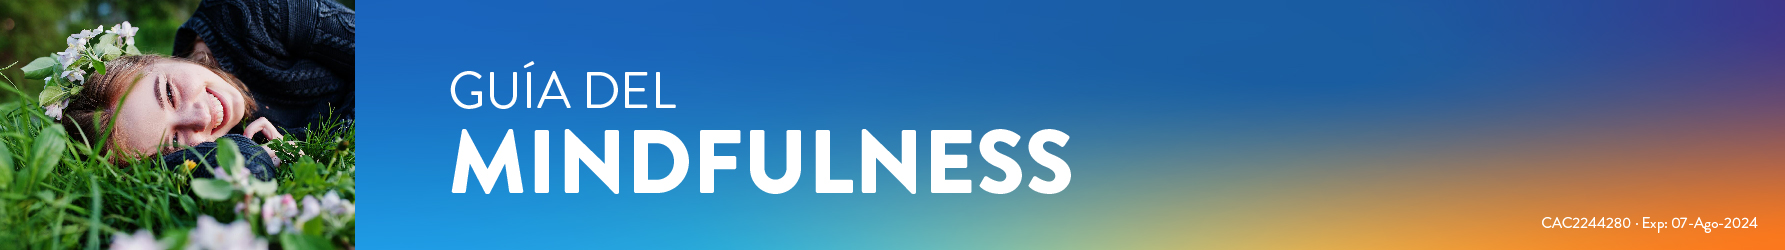 CAC2244280_Mindfulness_banner